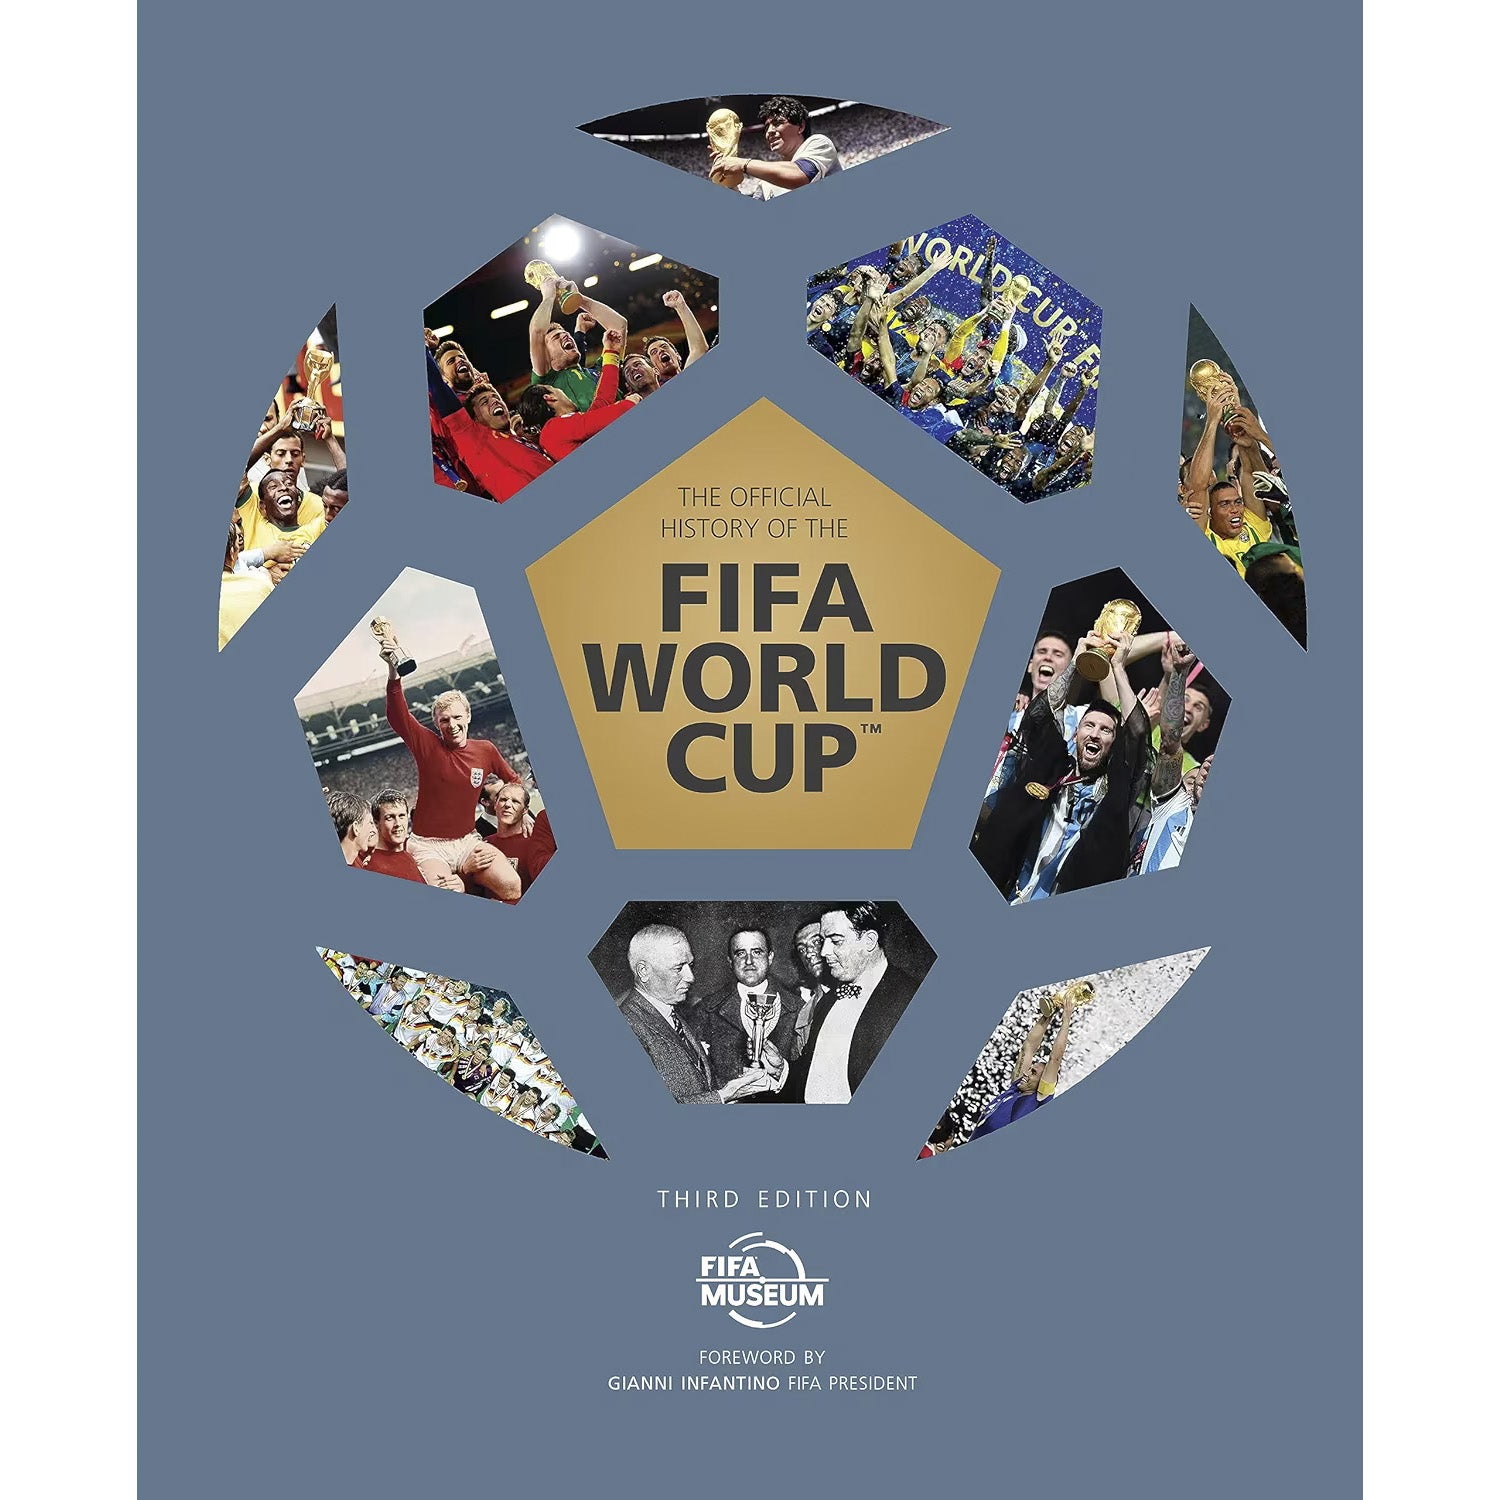 The Official History of the FIFA World Cup – Third Edition